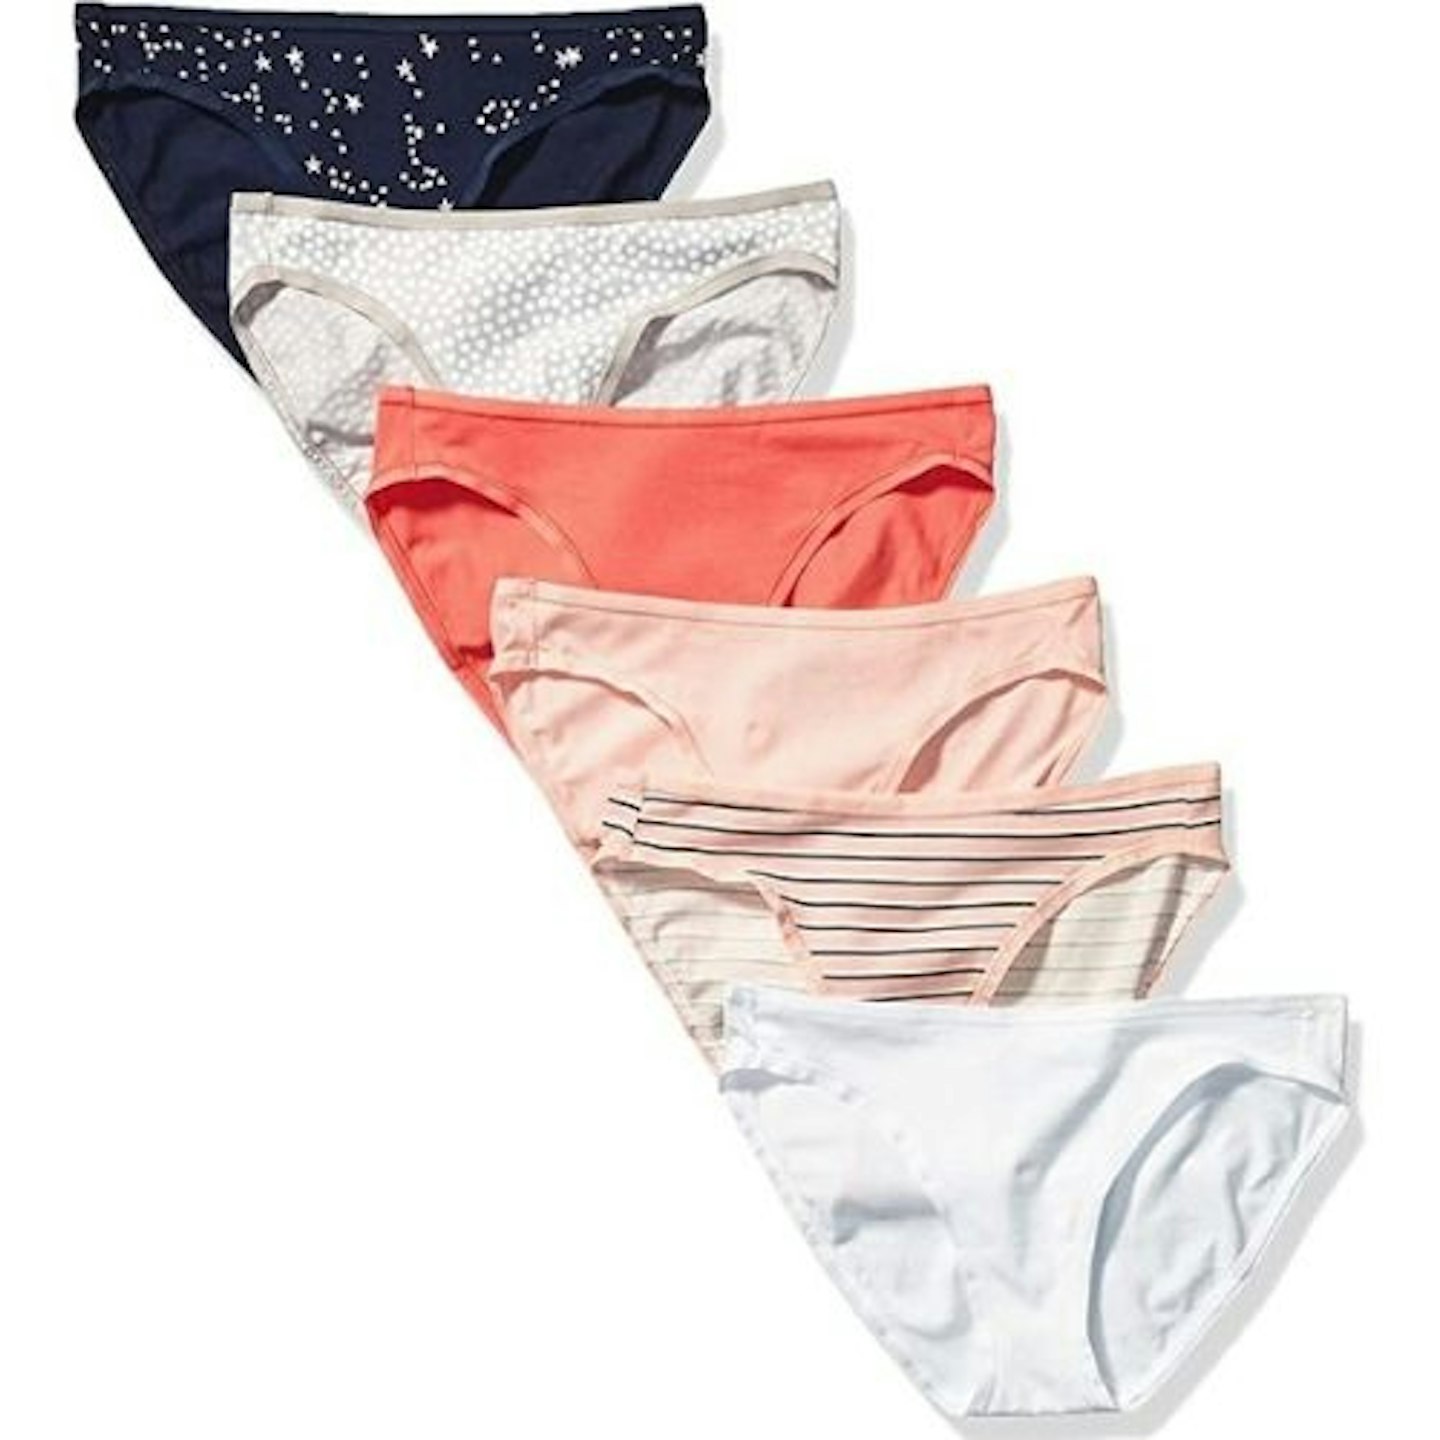 Best Cotton Knickers for Comfort